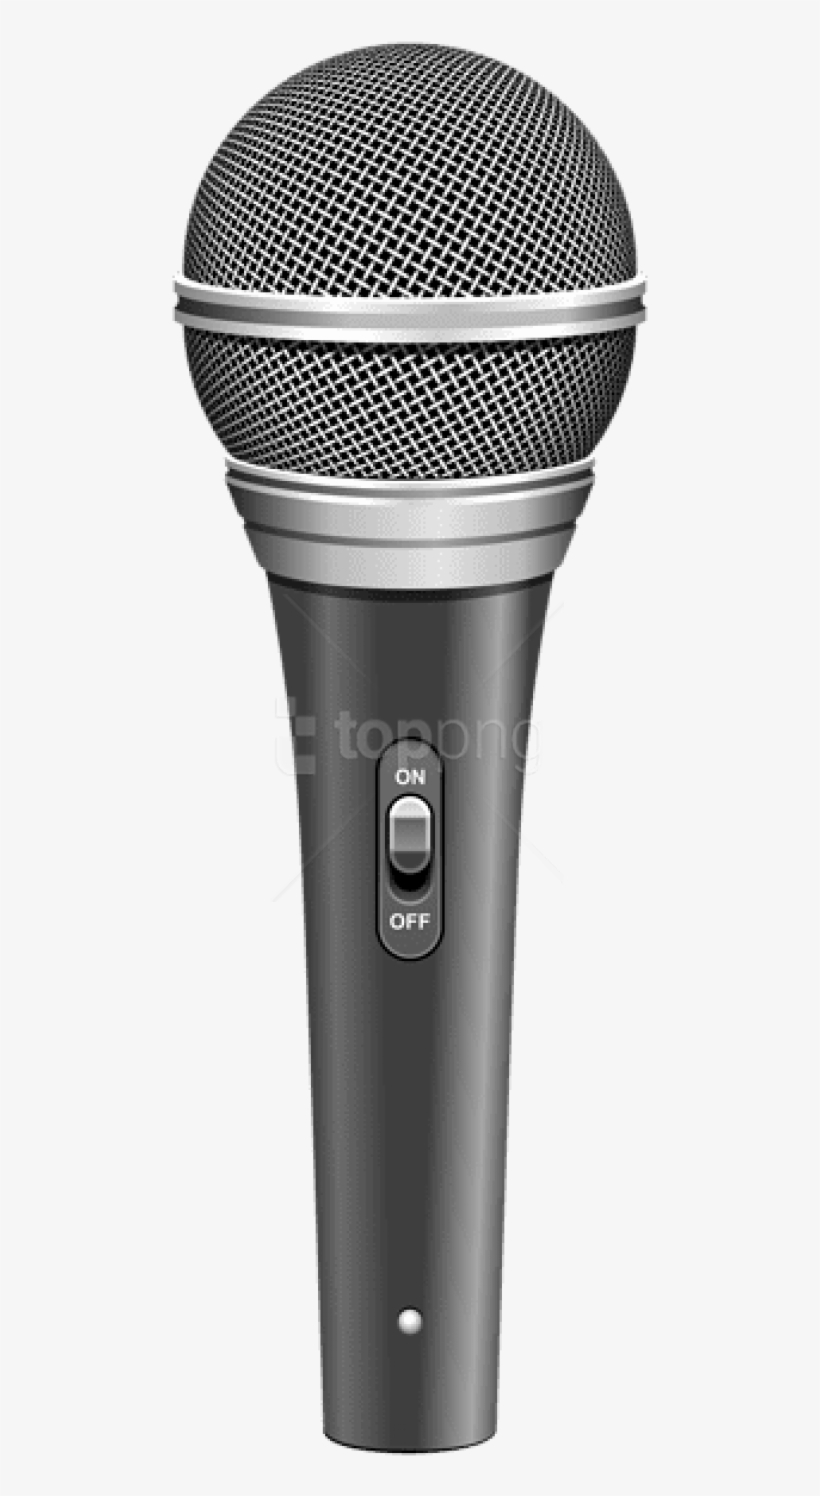 Free Png Microphone Png Png Images Transparent - Clipart Microphone Png, transparent png #9291068